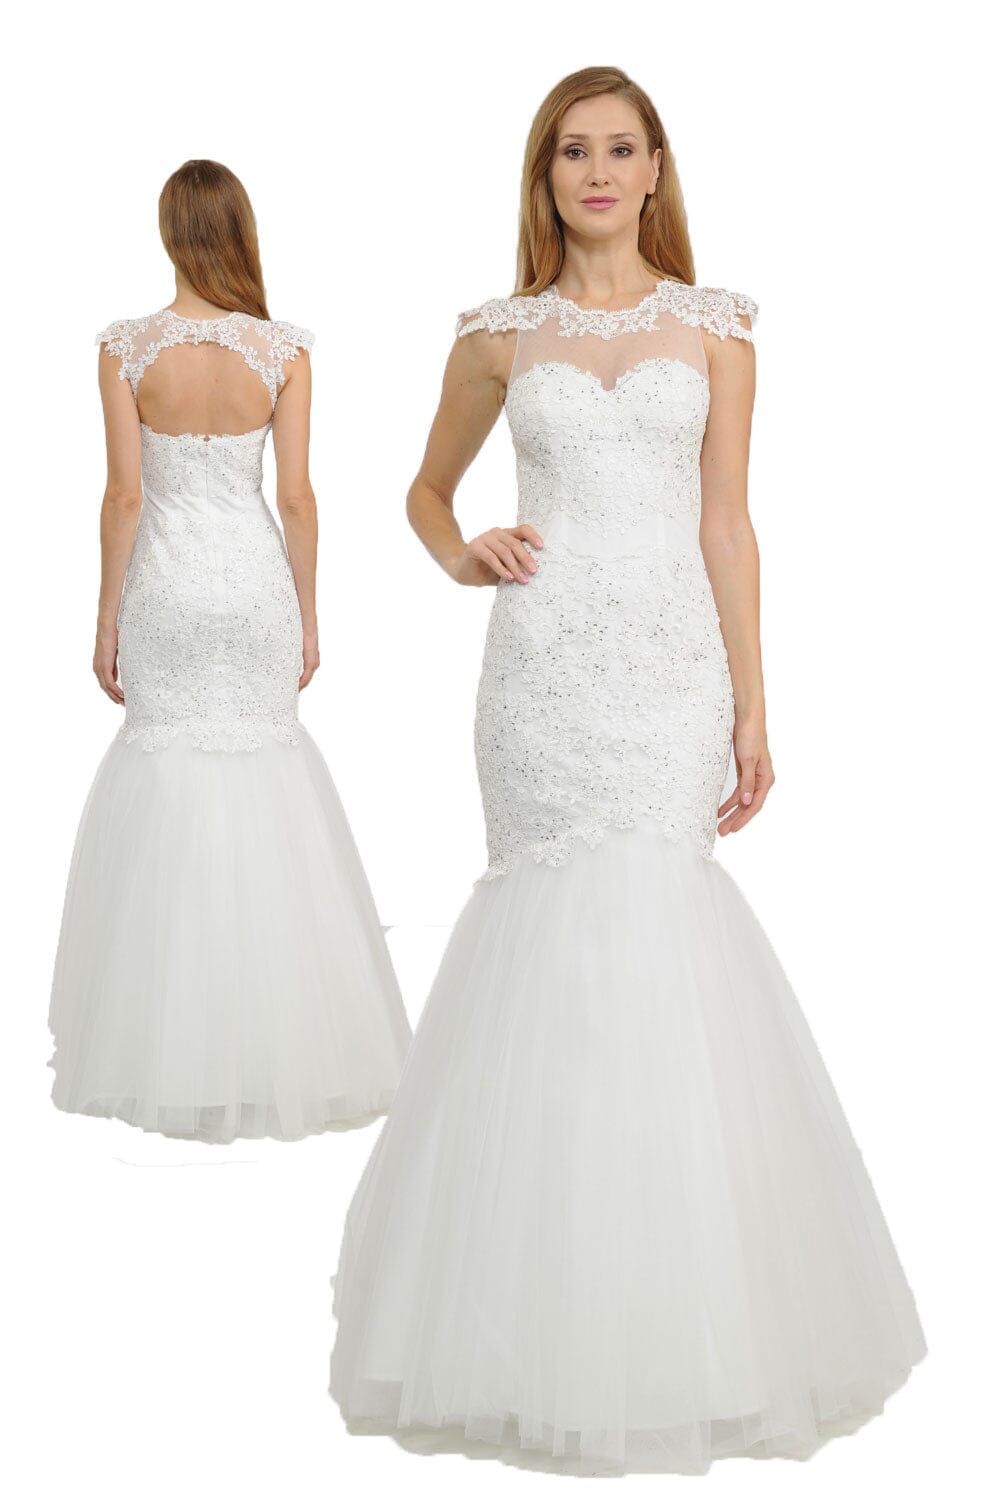 Illusion High-Neck Mermaid Dress with Lace Appliques by Poly USA 8226